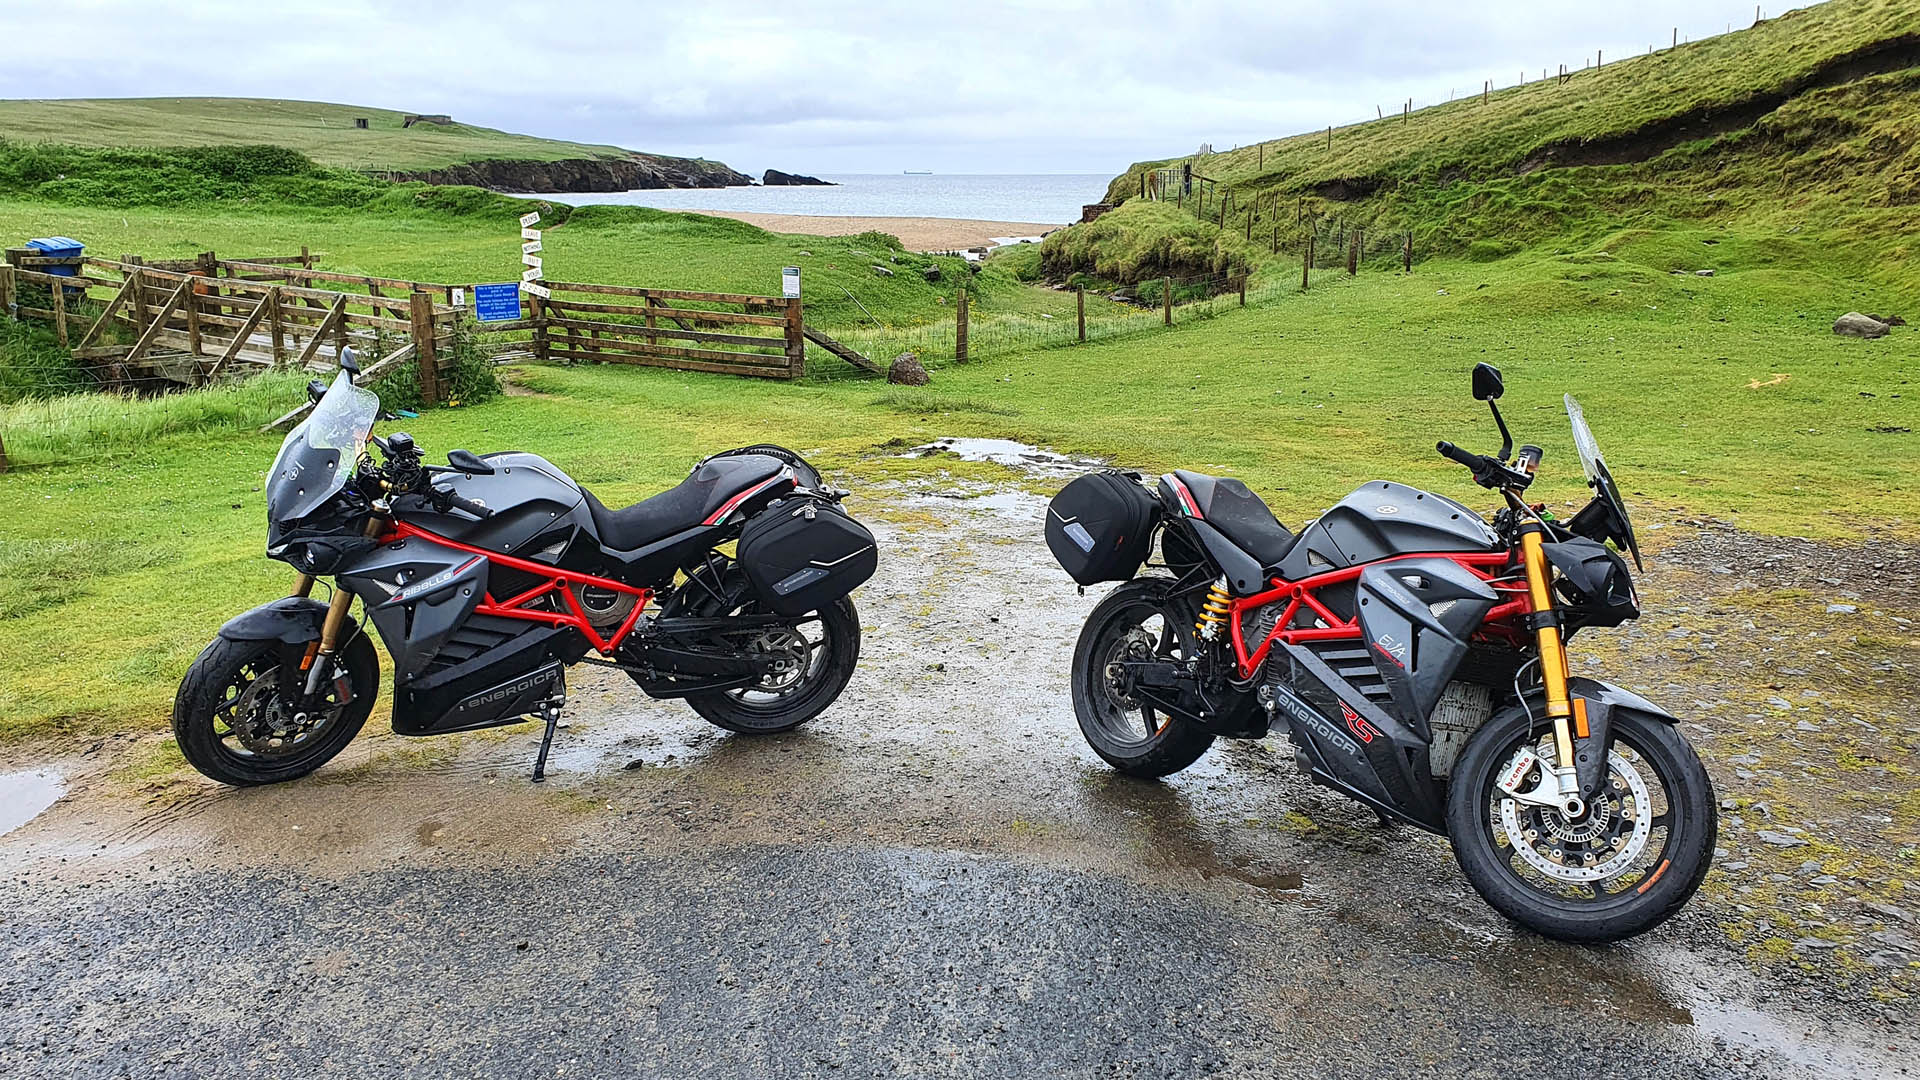 The bikes at Skaw Beach, Unst, Shetland — the most northerly point in the UK accessible by public road, at around 10:20 on Wednesday 15th June, 2022.